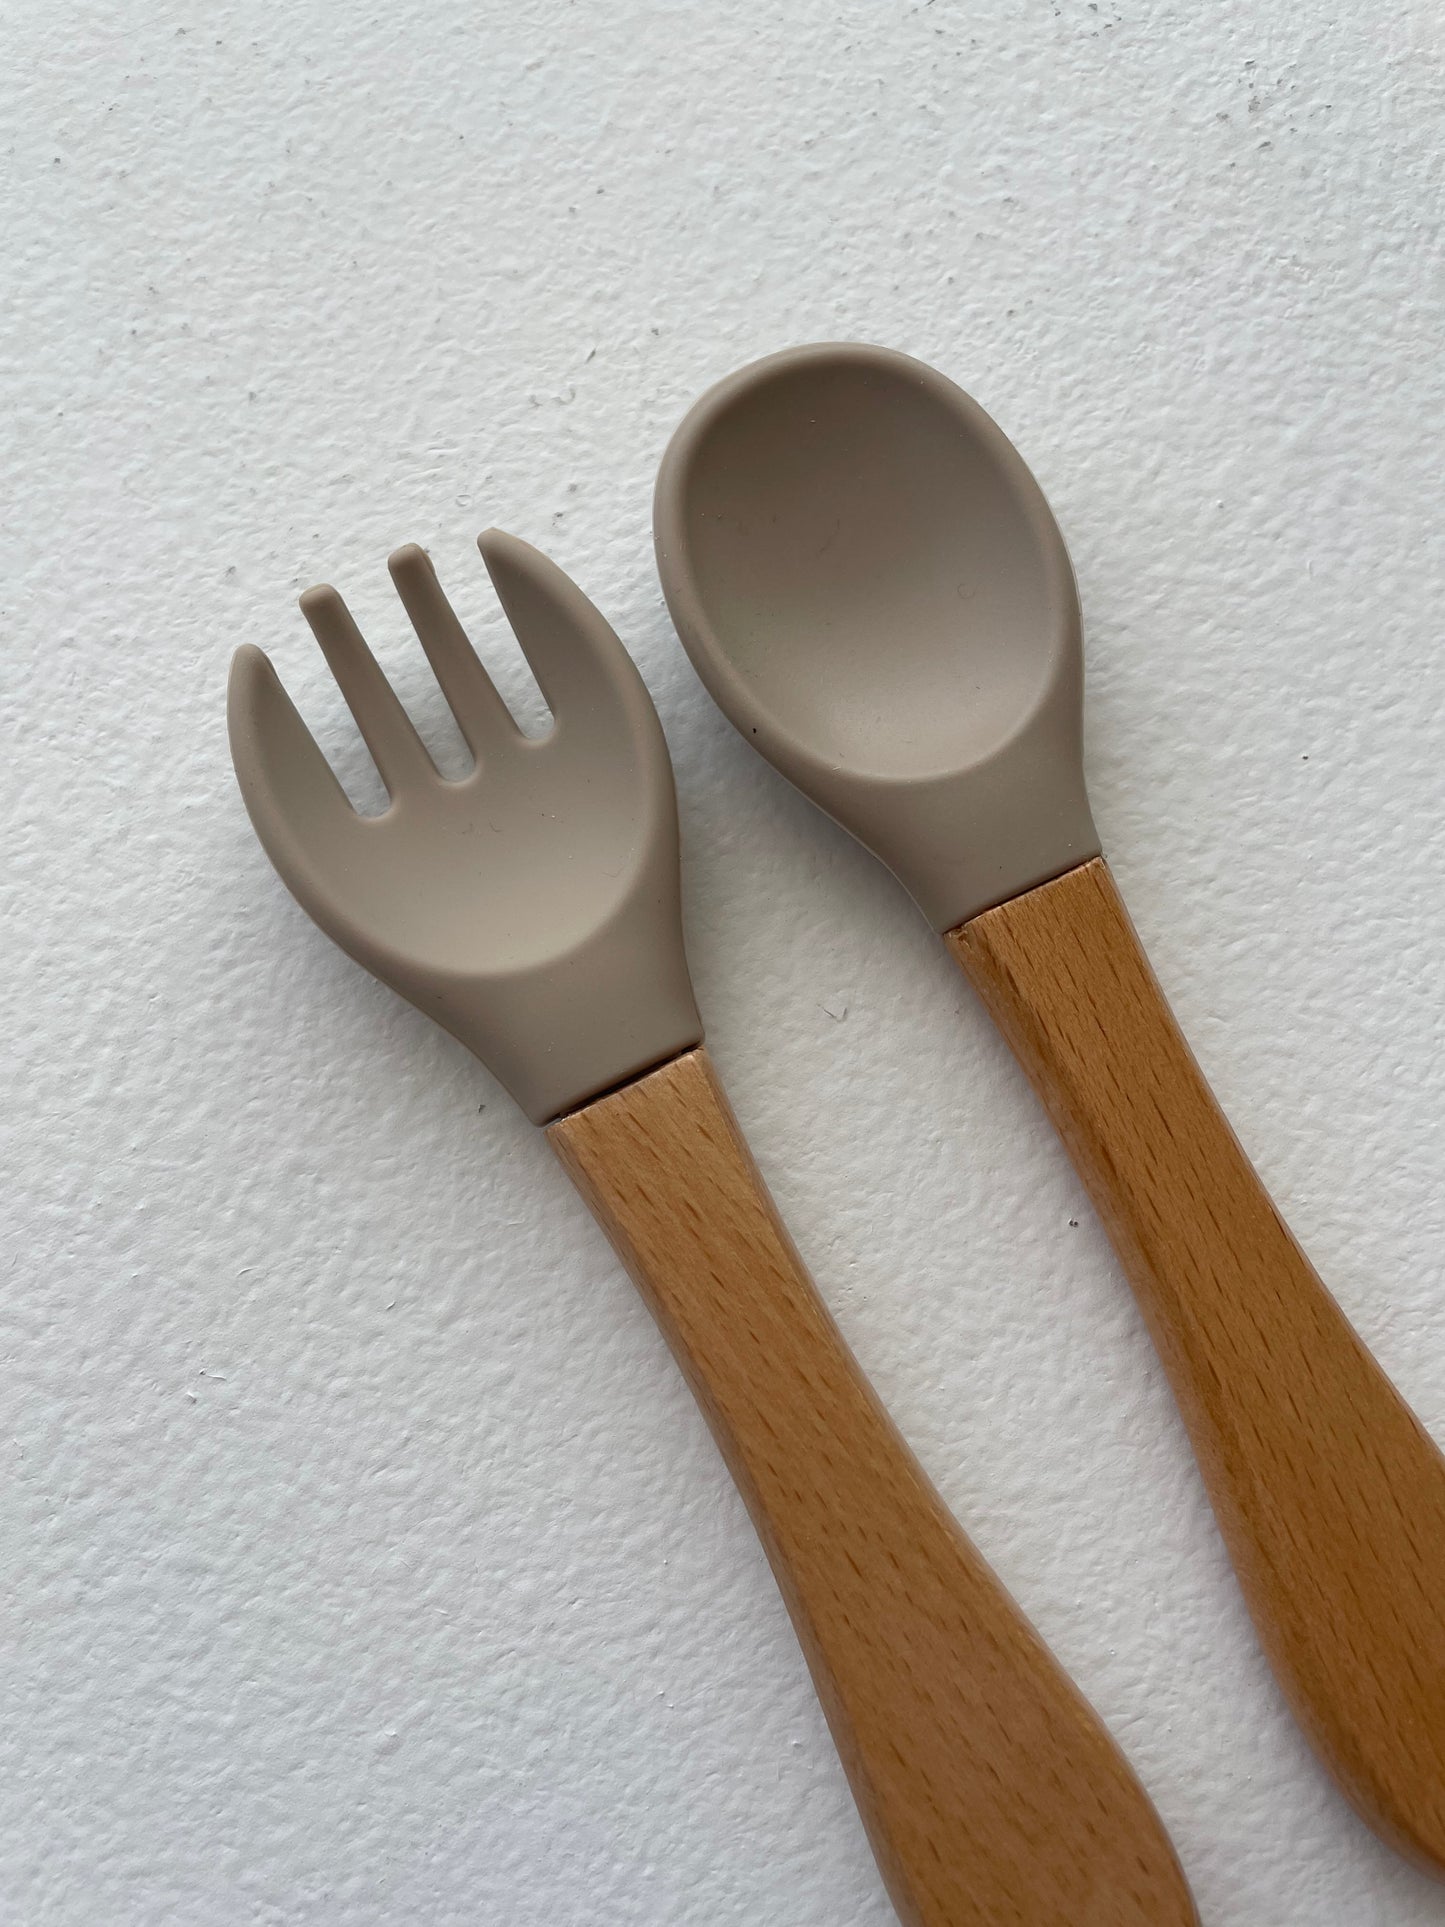 The Spoon & Fork Set